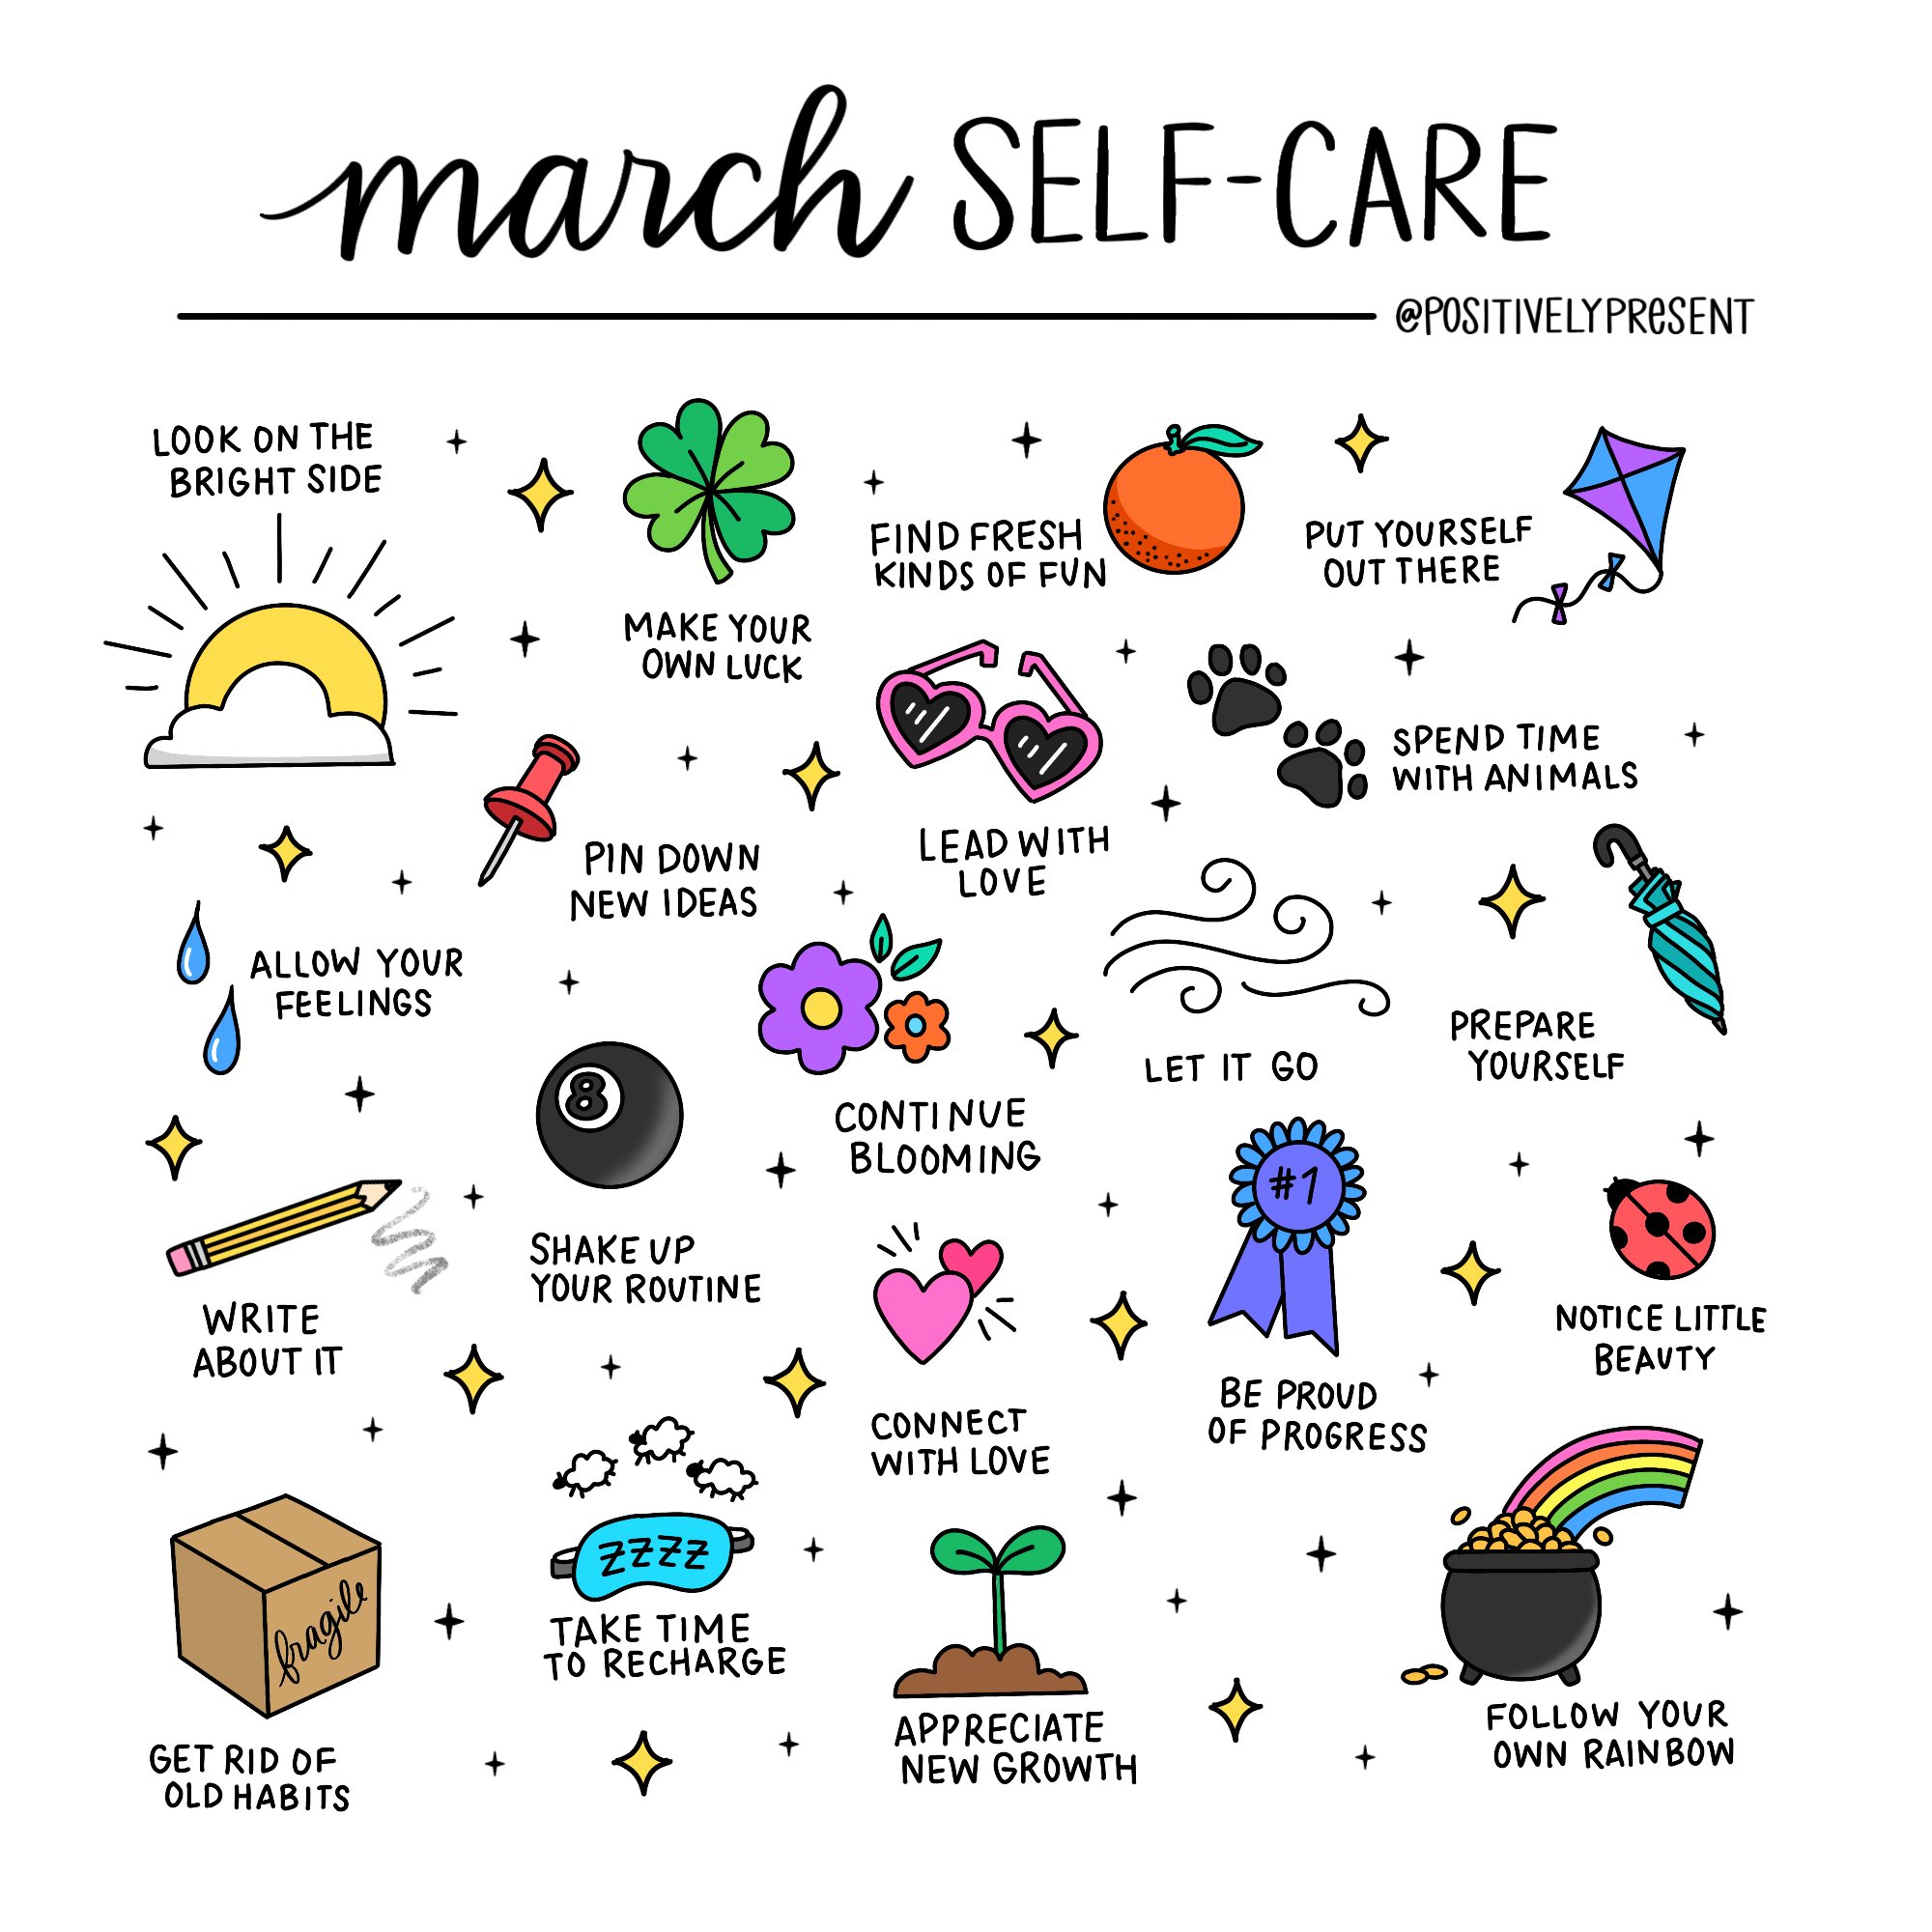 Positively Present on X: A few self-care ideas for the month of